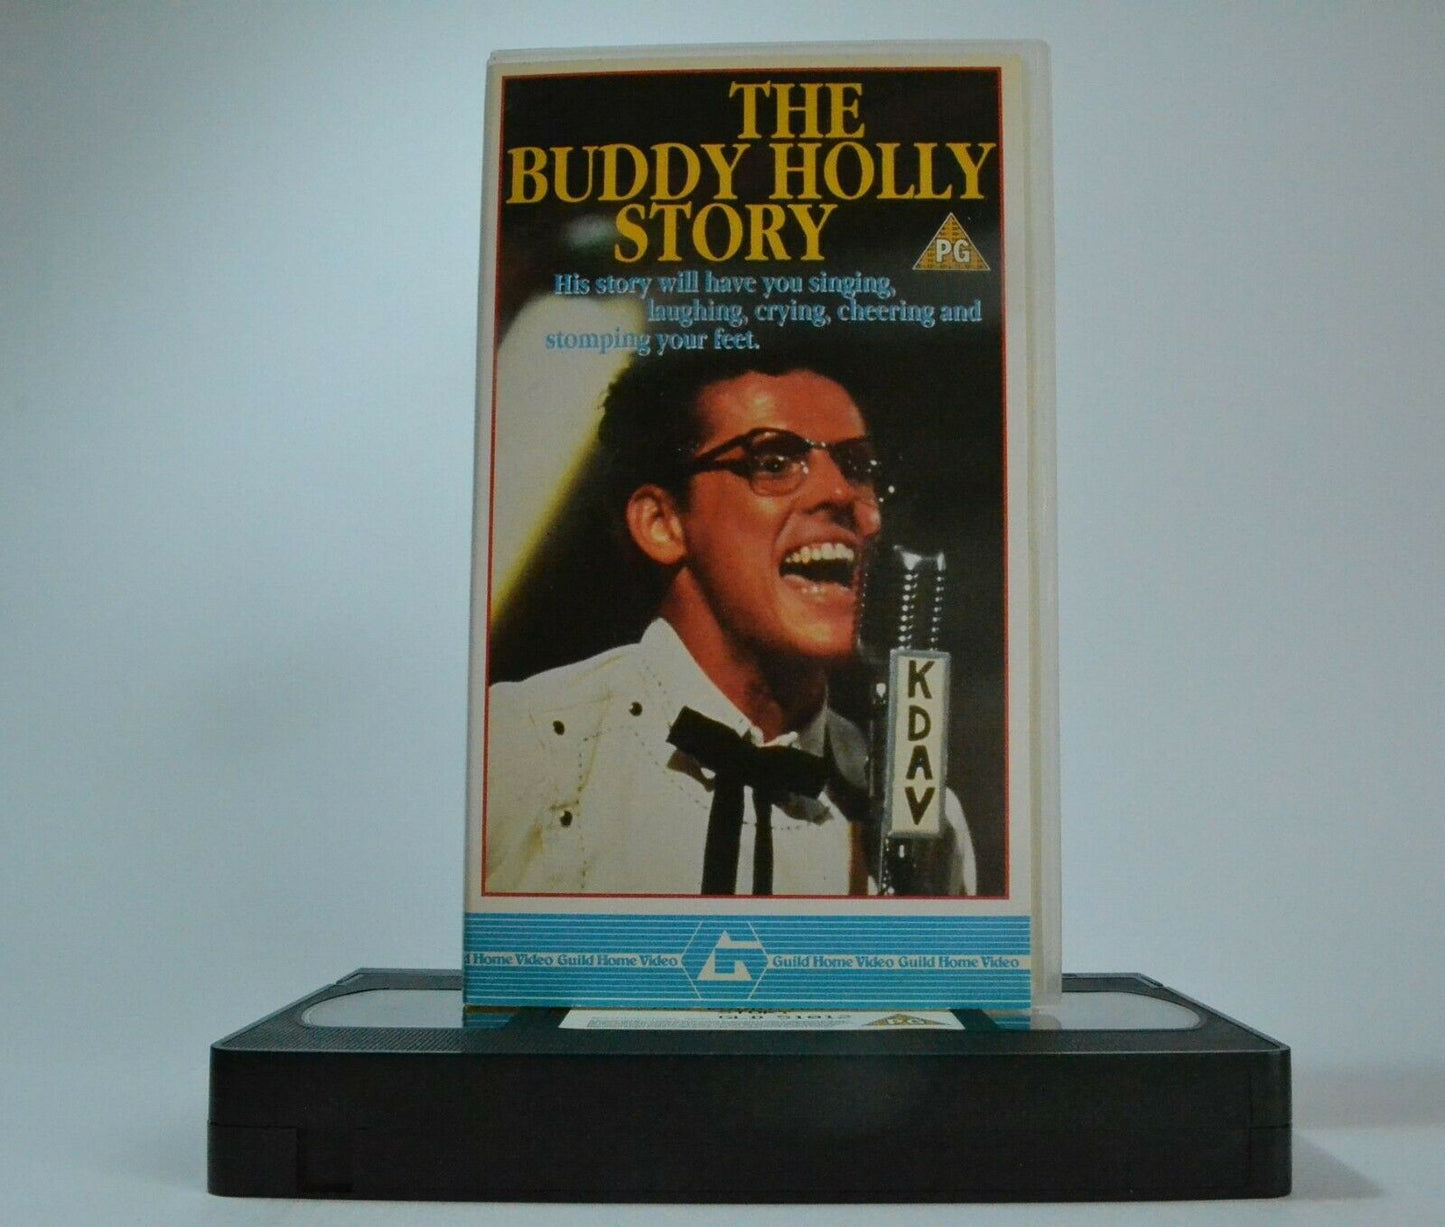 The Buddy Holly Story (1978): Musical Biography - Gary Busey / Don Stroud - VHS-